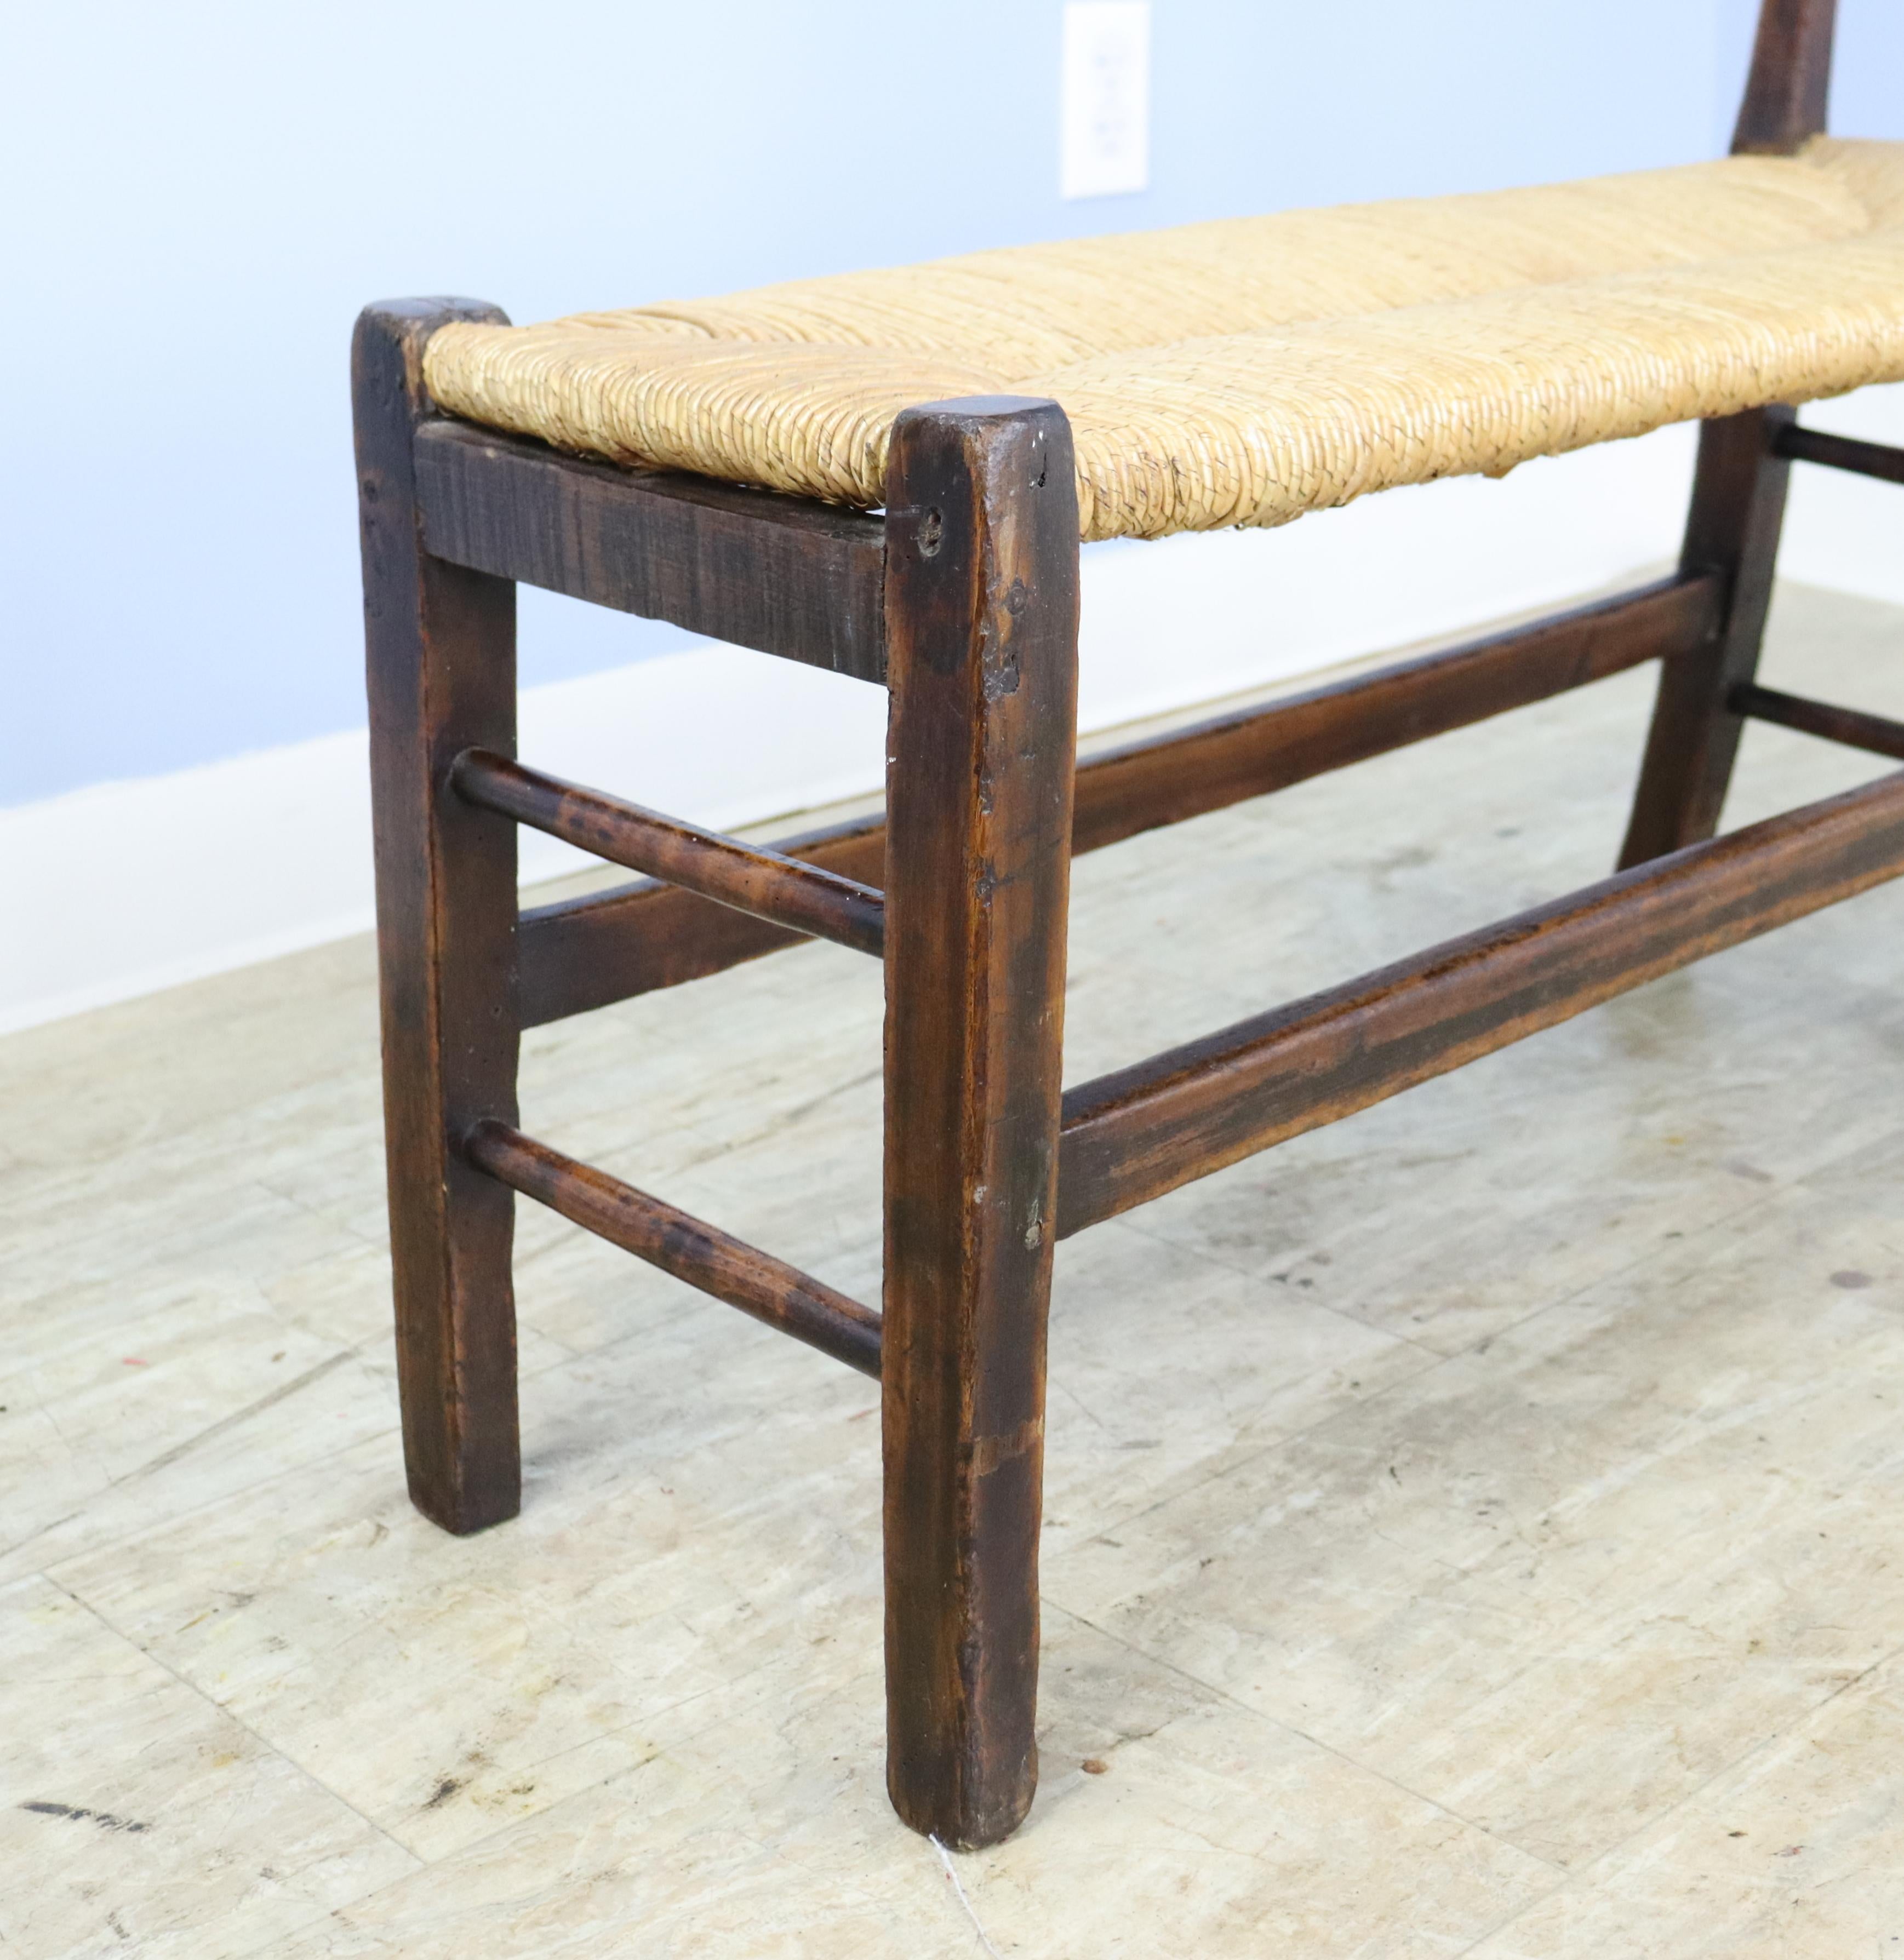 A charming early rush seated stool with all of its original seat materials and a single arm. The piece is solid and sturdy. the back legs have a slight flare which may be intentional but we cannot say for sure.